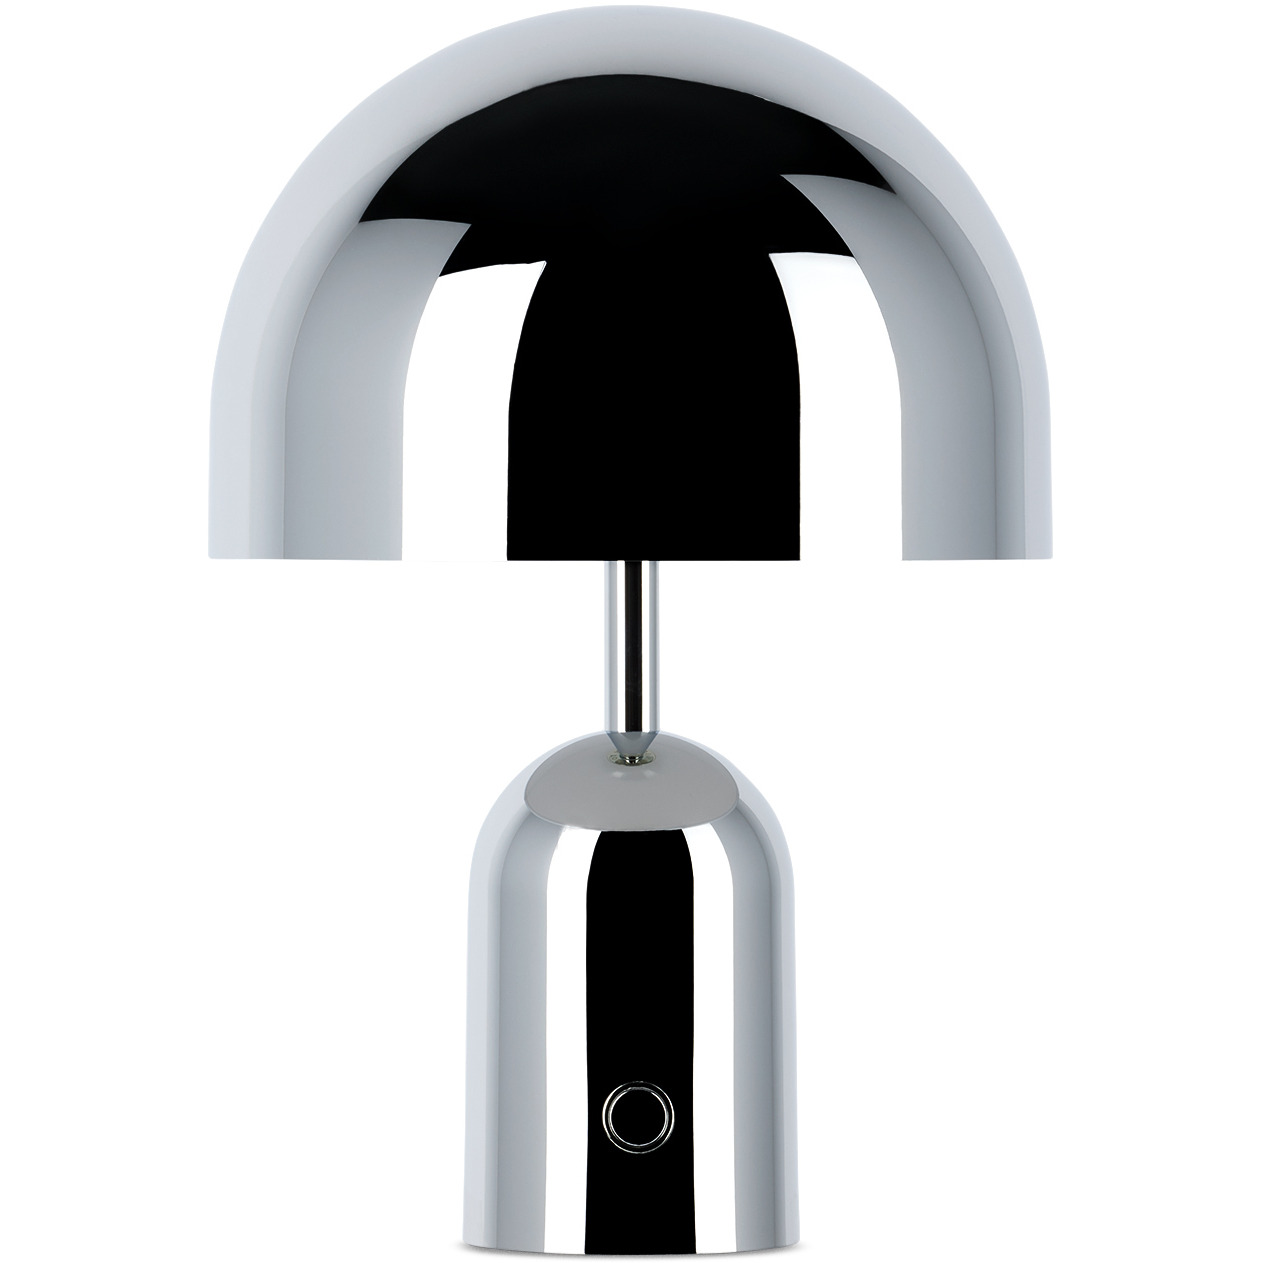 Tom Dixon Silver Bell Portable Table Lamp - image 1